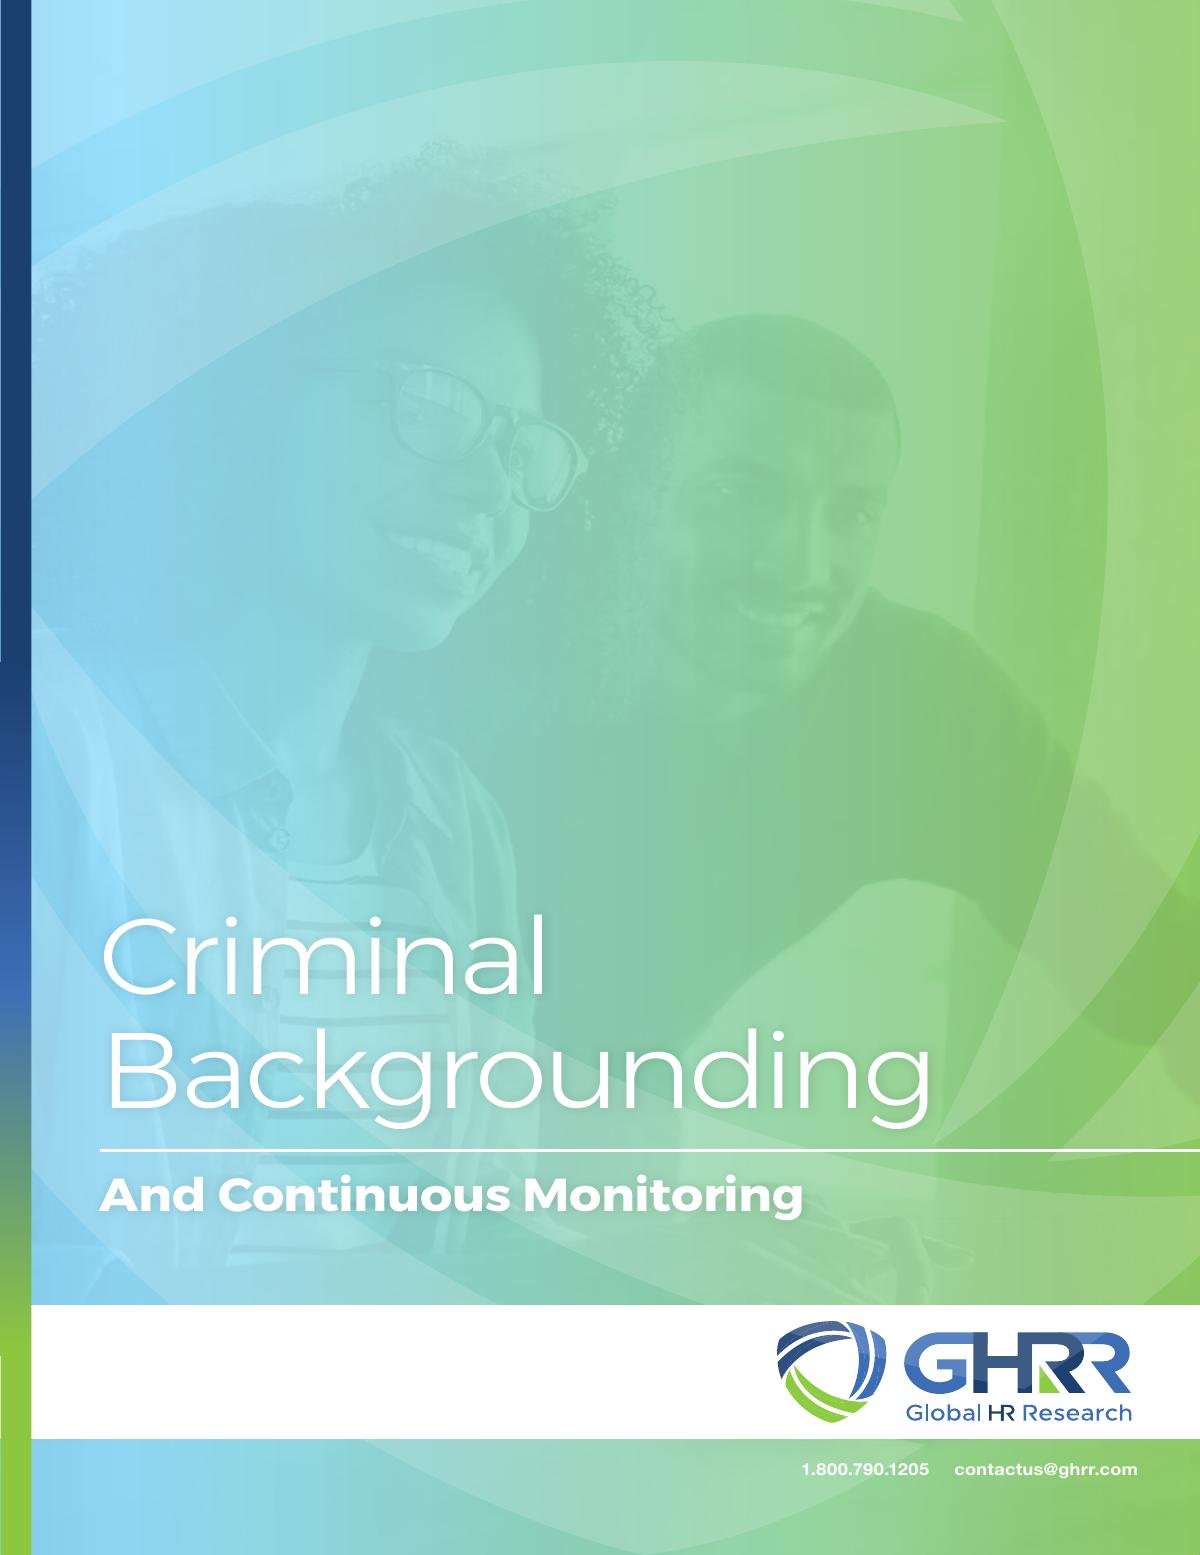 Criminal Backgrounding and Continuous Monitoring